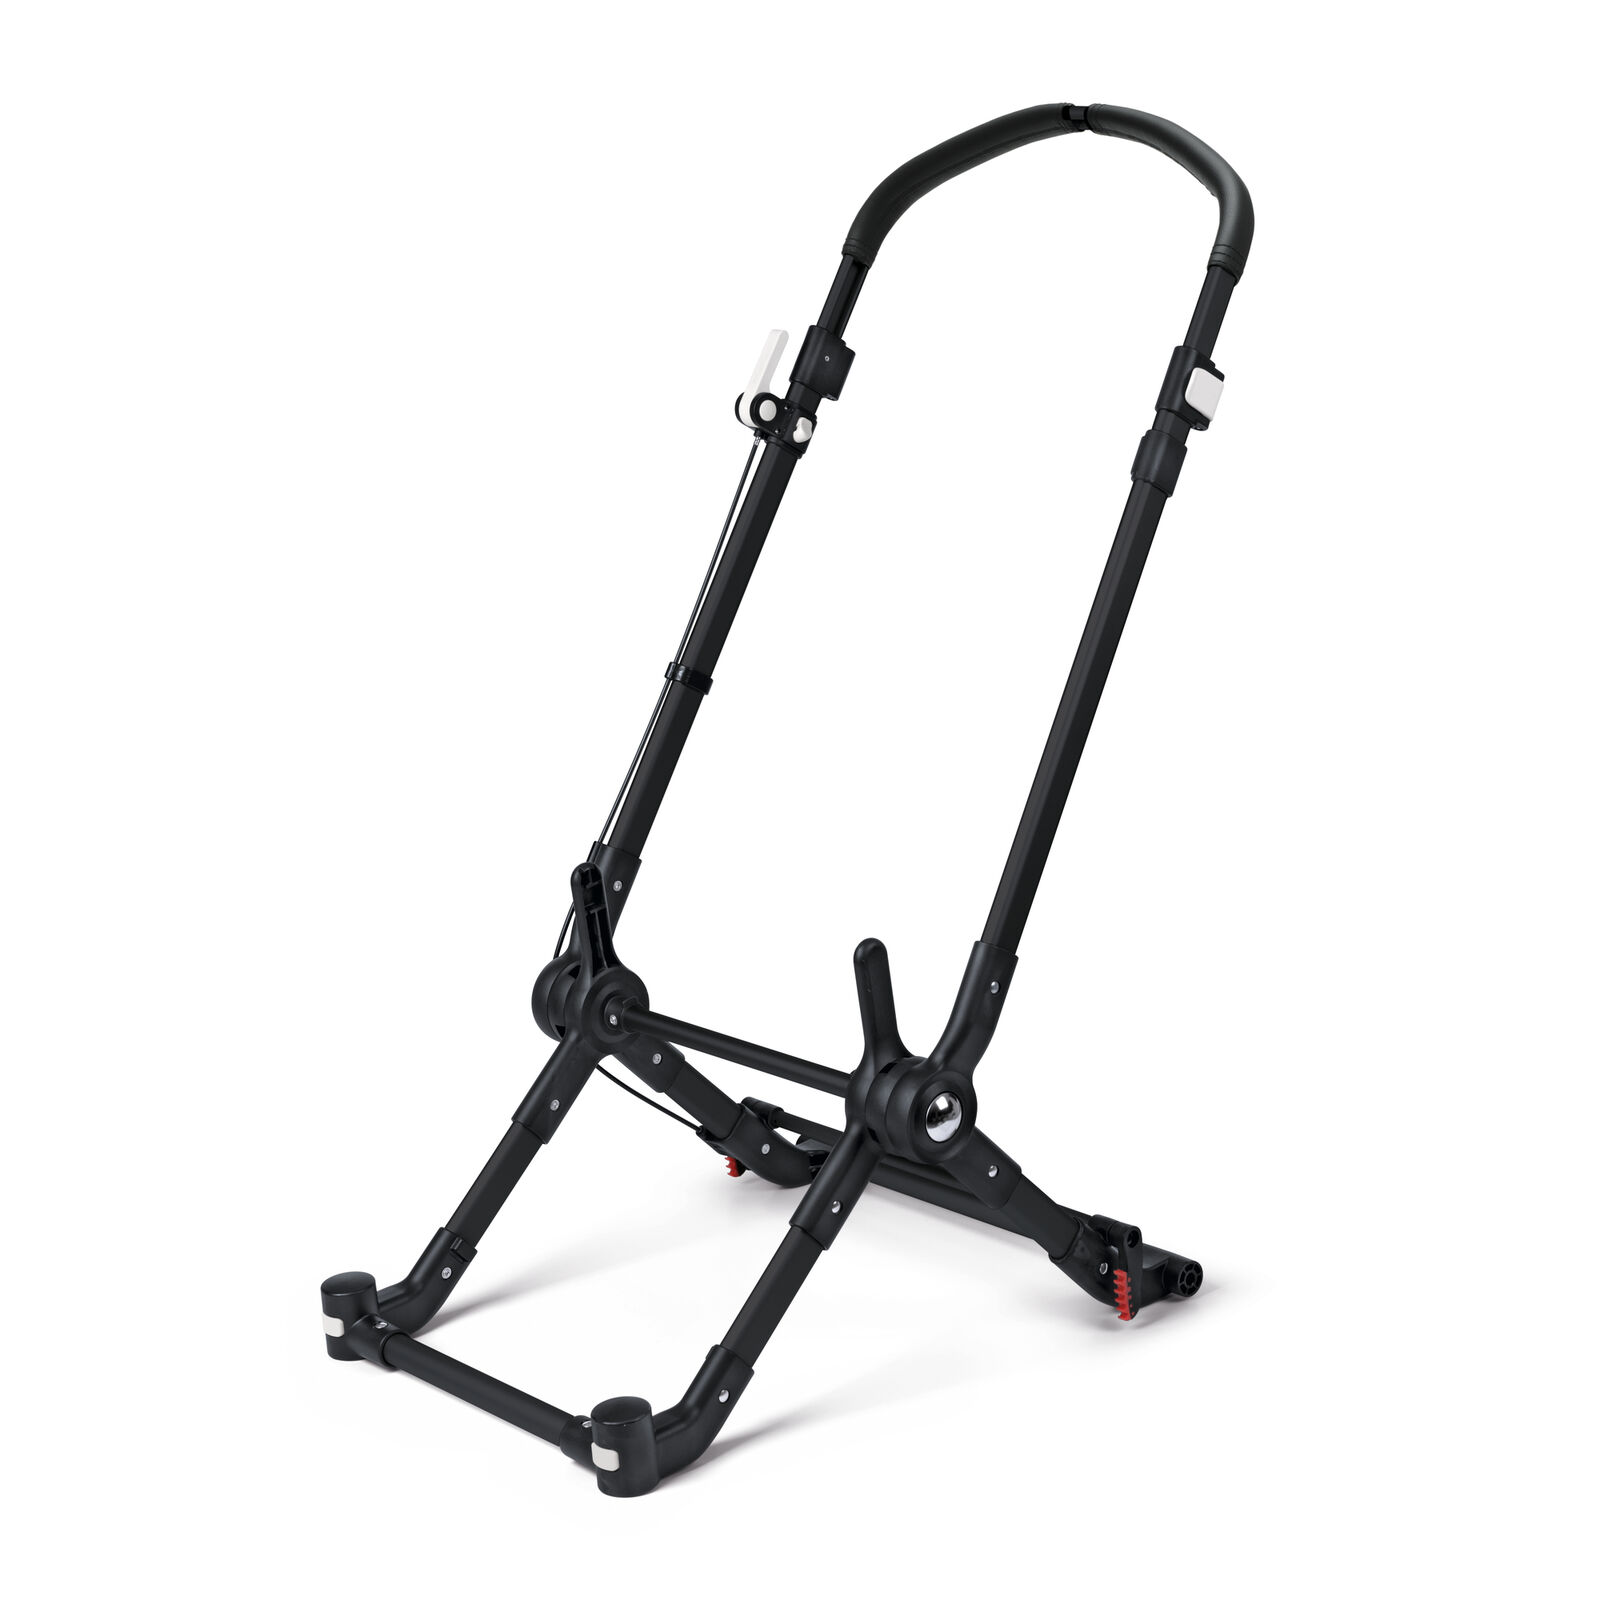 Bugaboo Cameleon 3 chassis - View 1